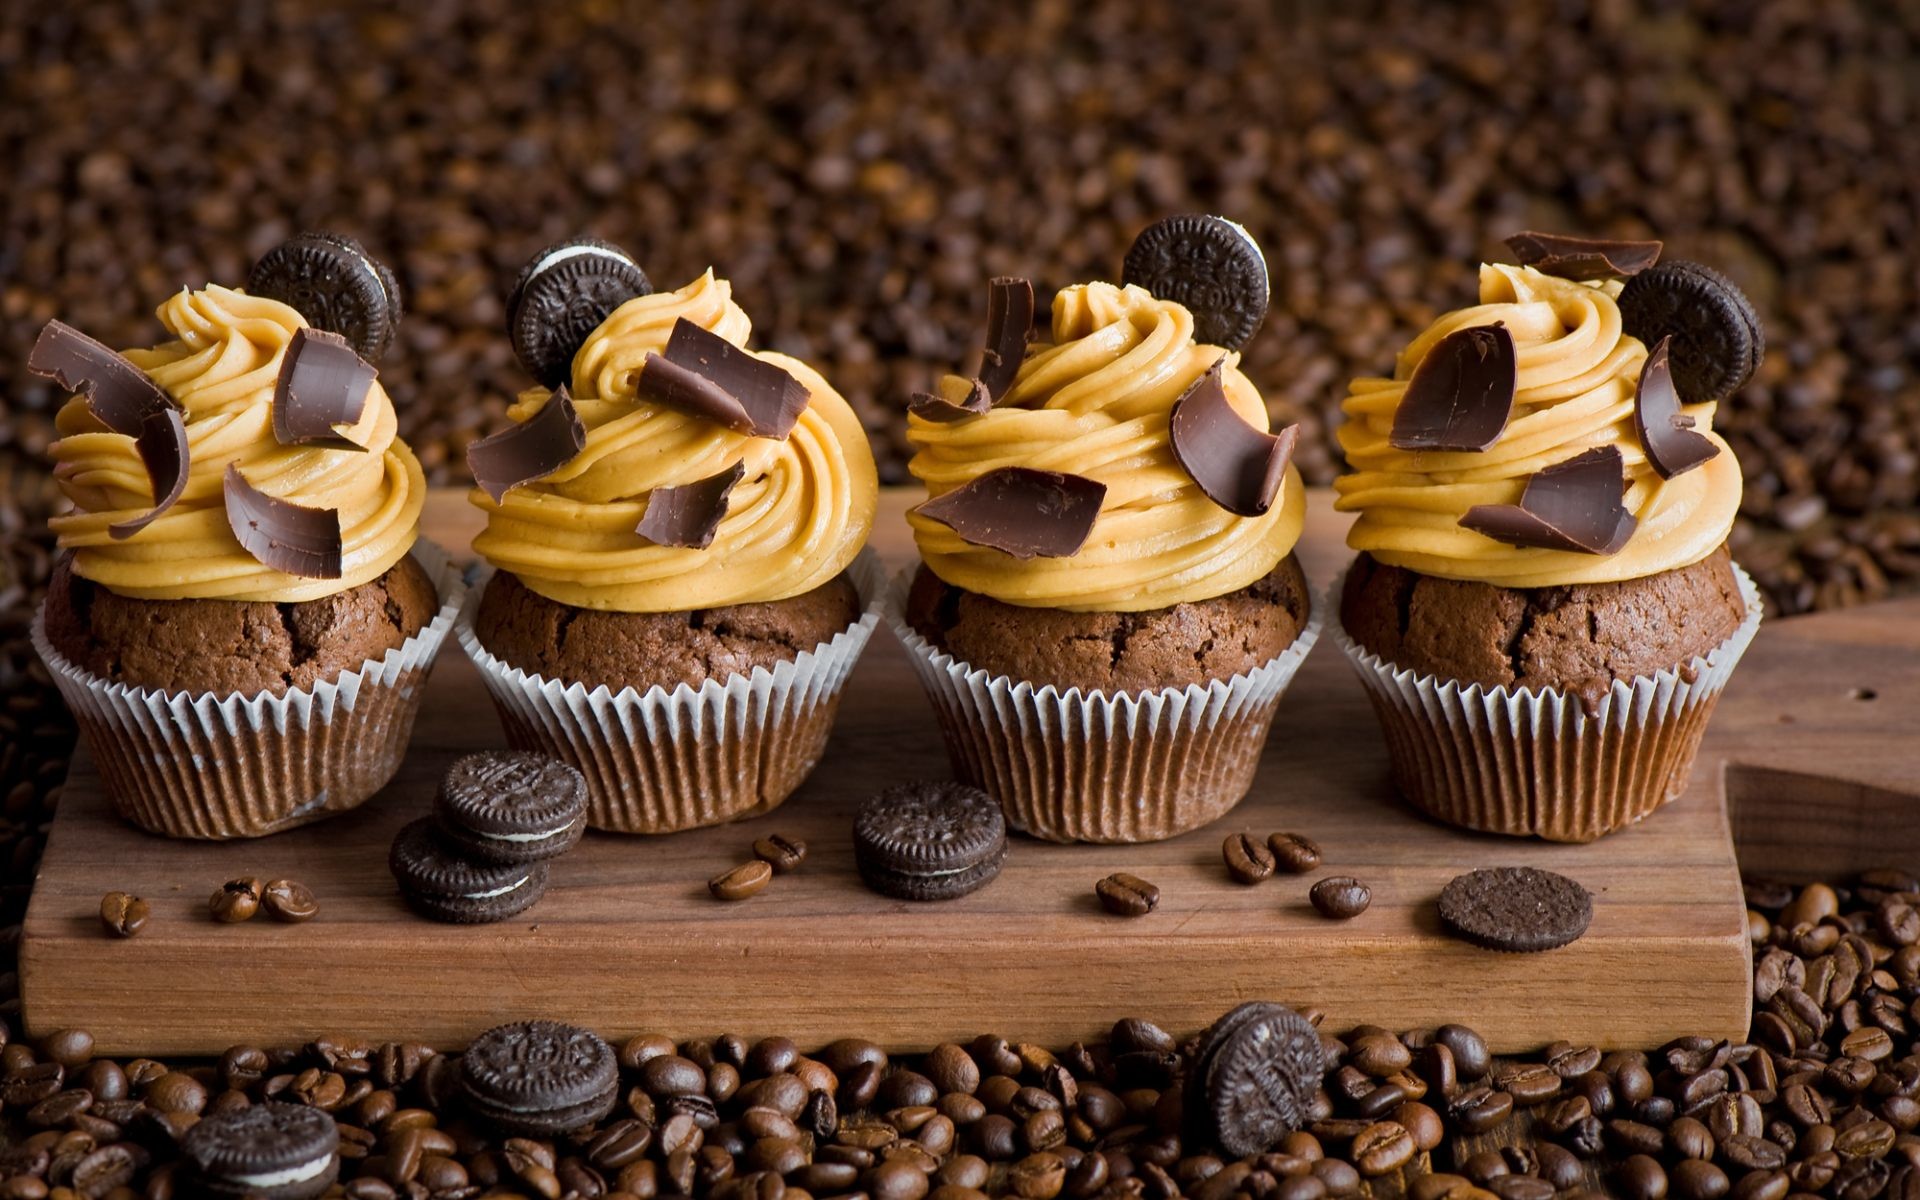 1920x1200 Gallery of Cupcakes Backgrounds, Wallpapers SHunVMall Graphics 1920Ã1200